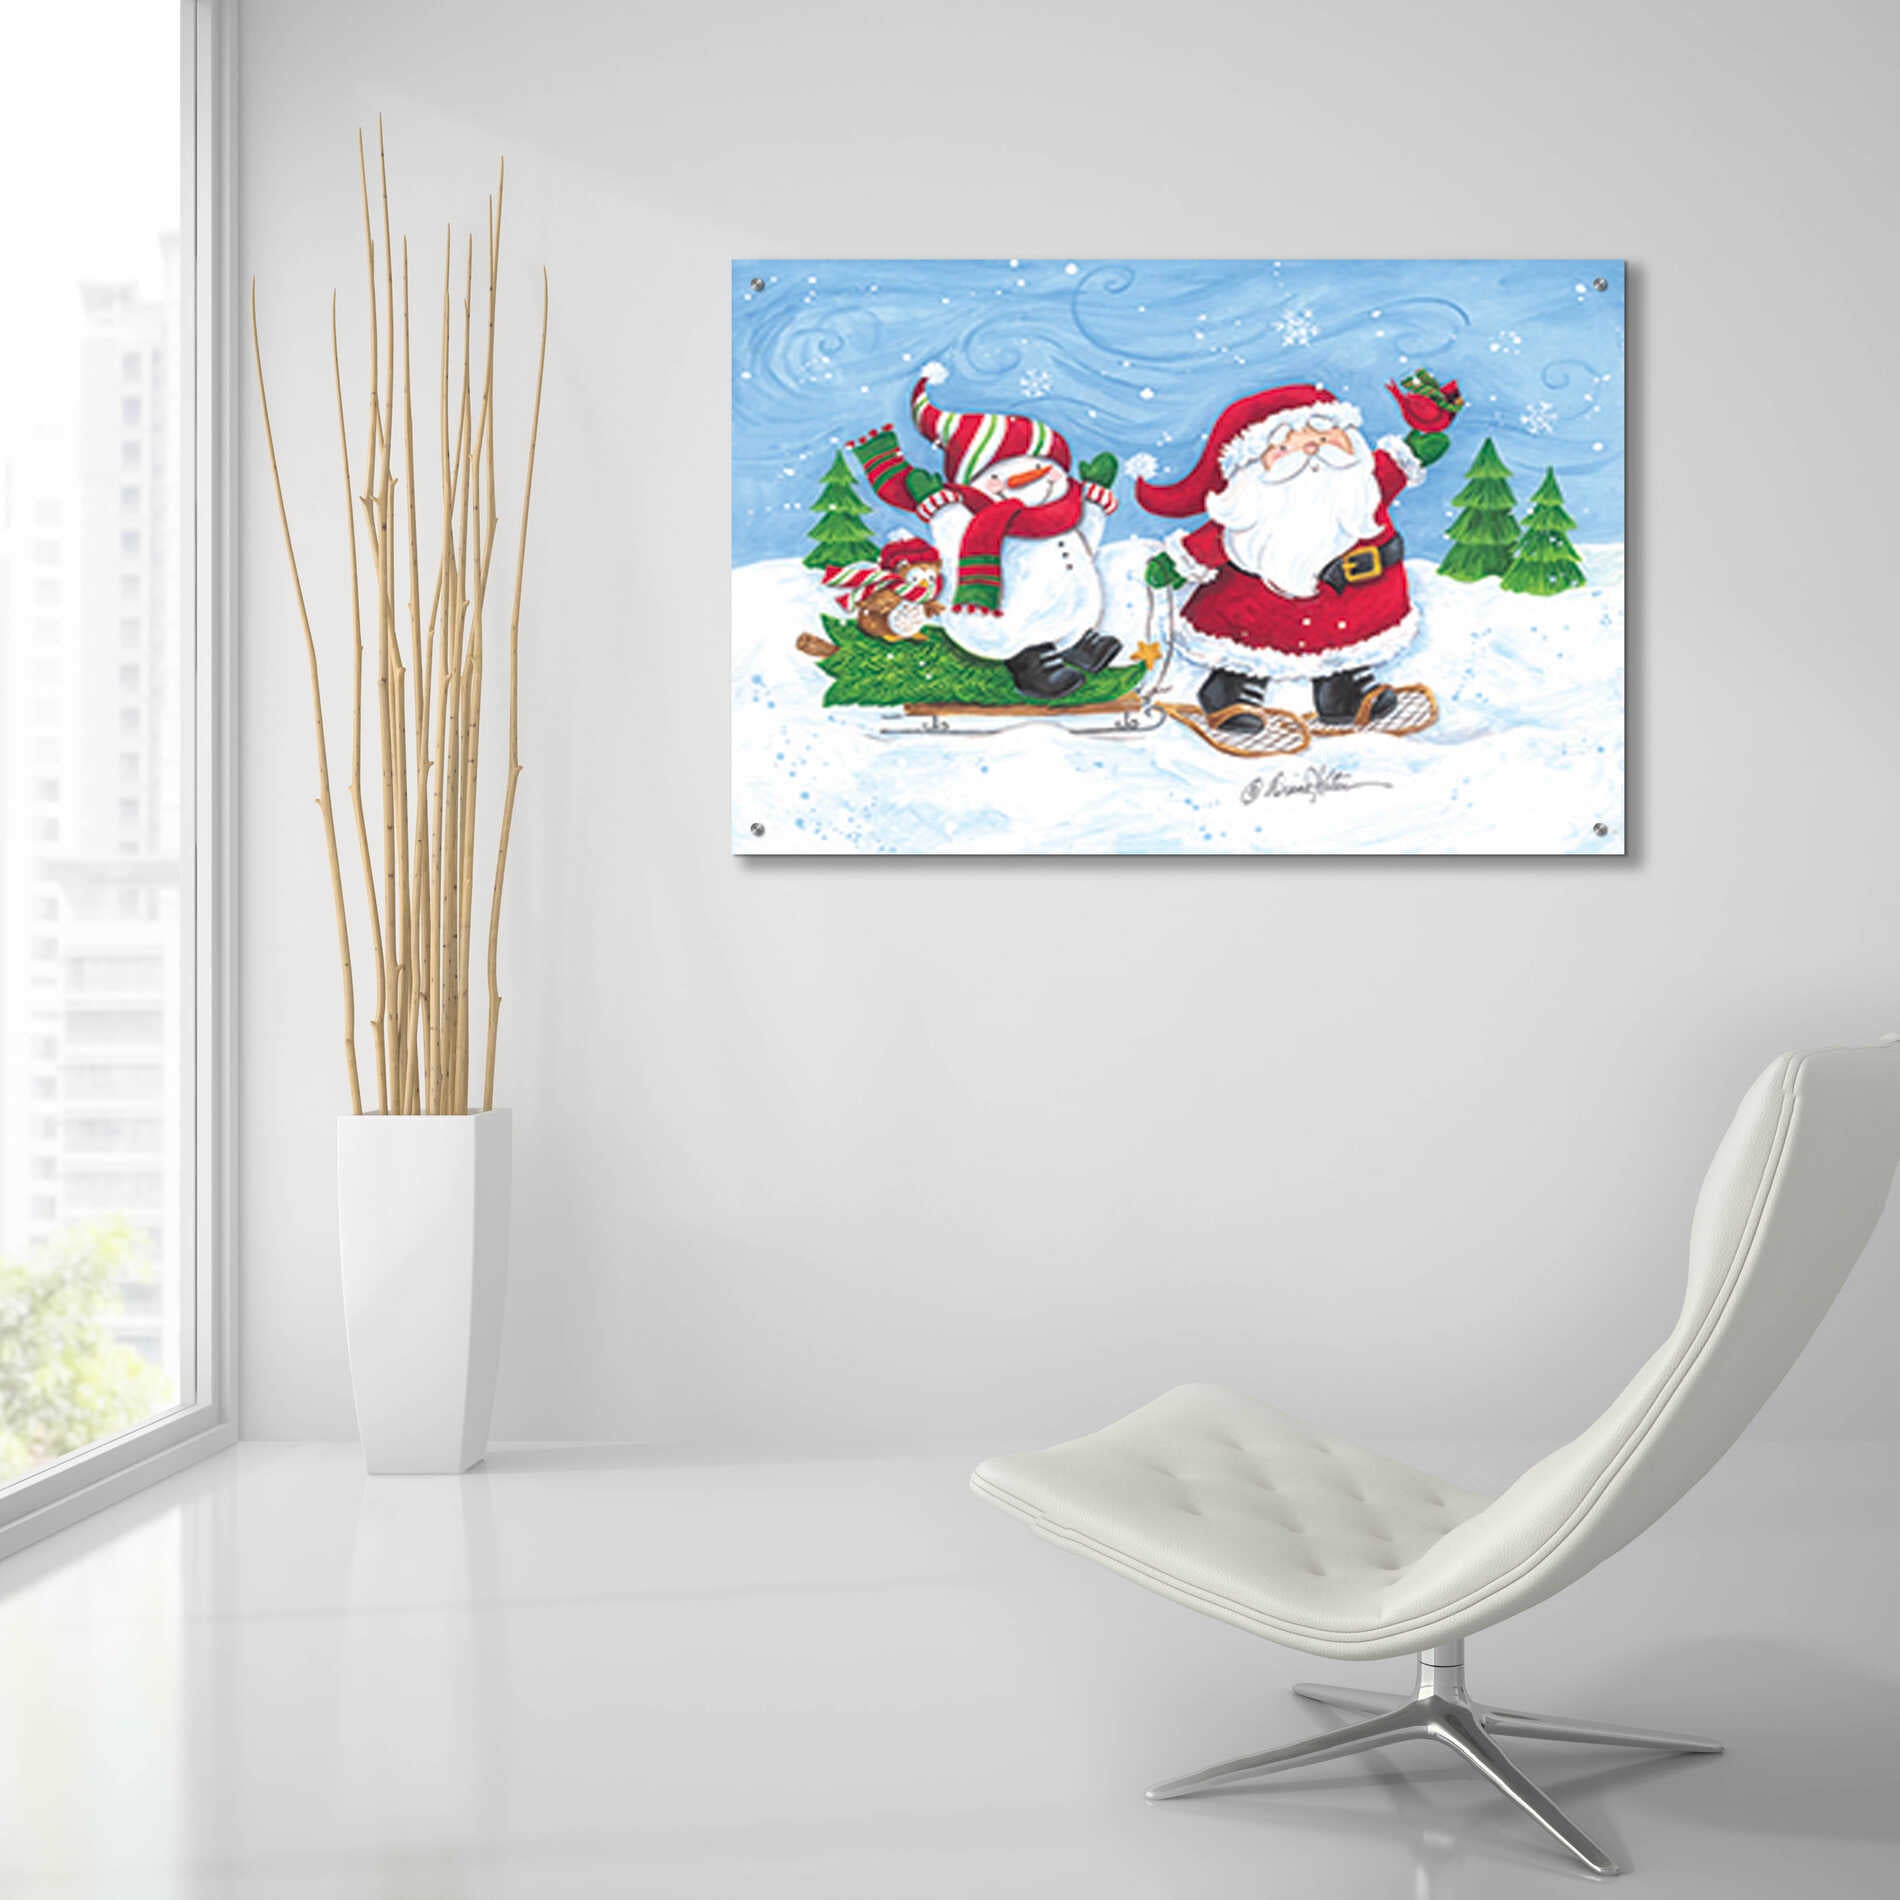 Epic Art 'Getting the Christmas Tree' by Diane Kater, Acrylic Glass Wall Art,36x24